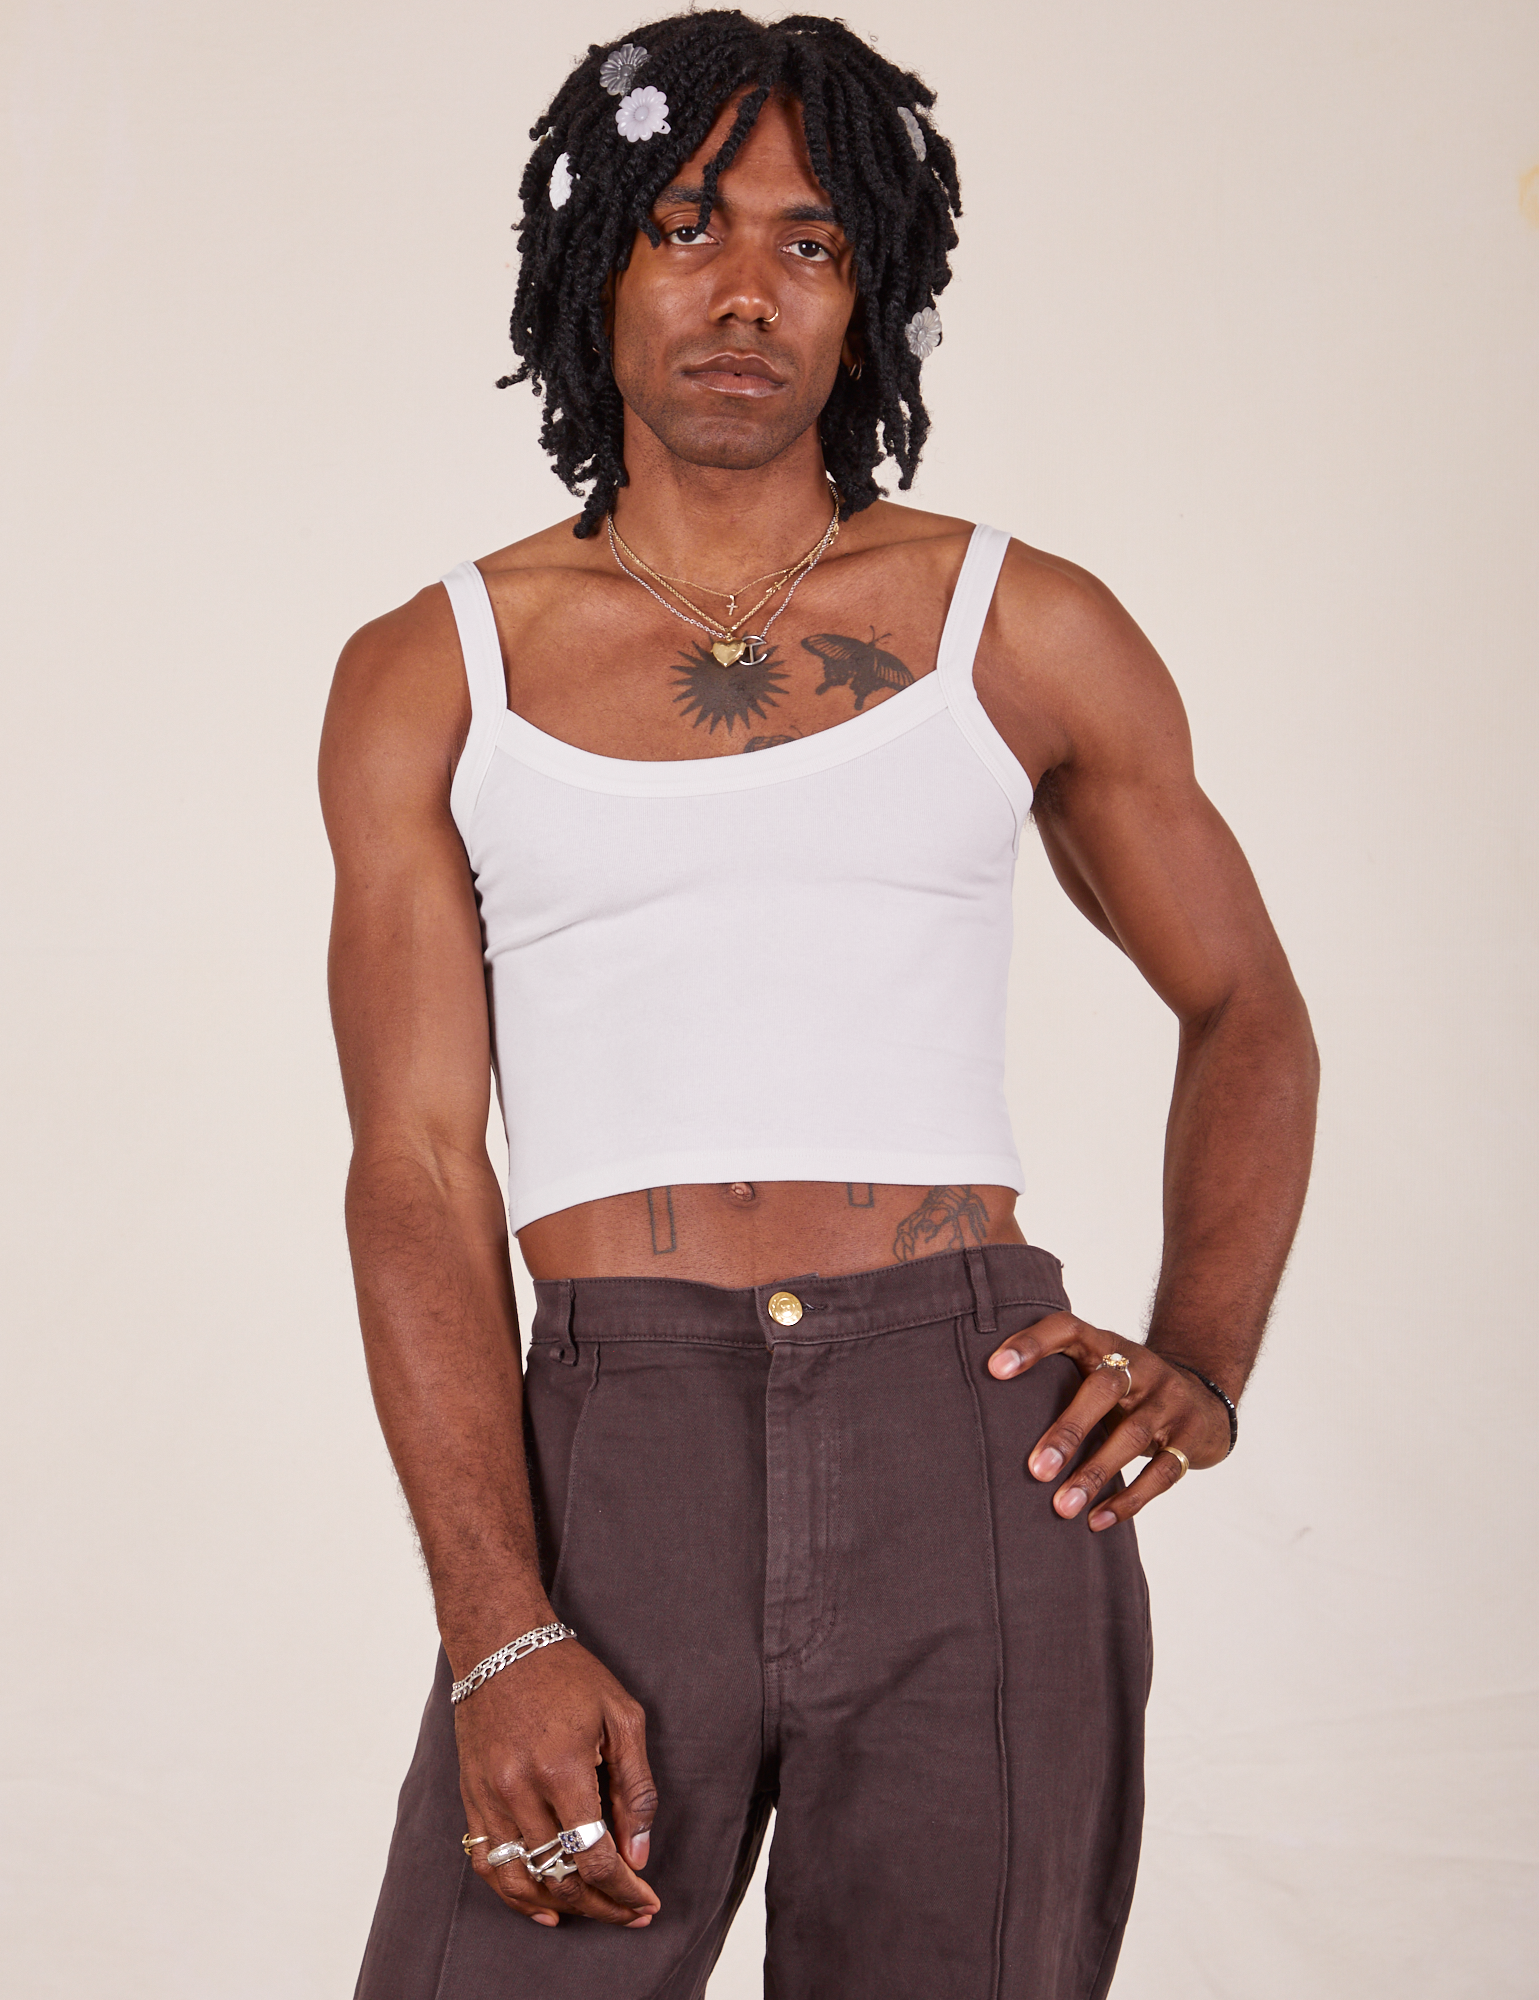 Jerrod is 6&#39;3&quot; and wearing S Cropped Cami in Vintage Off-White paired with espresso brown Western Pants